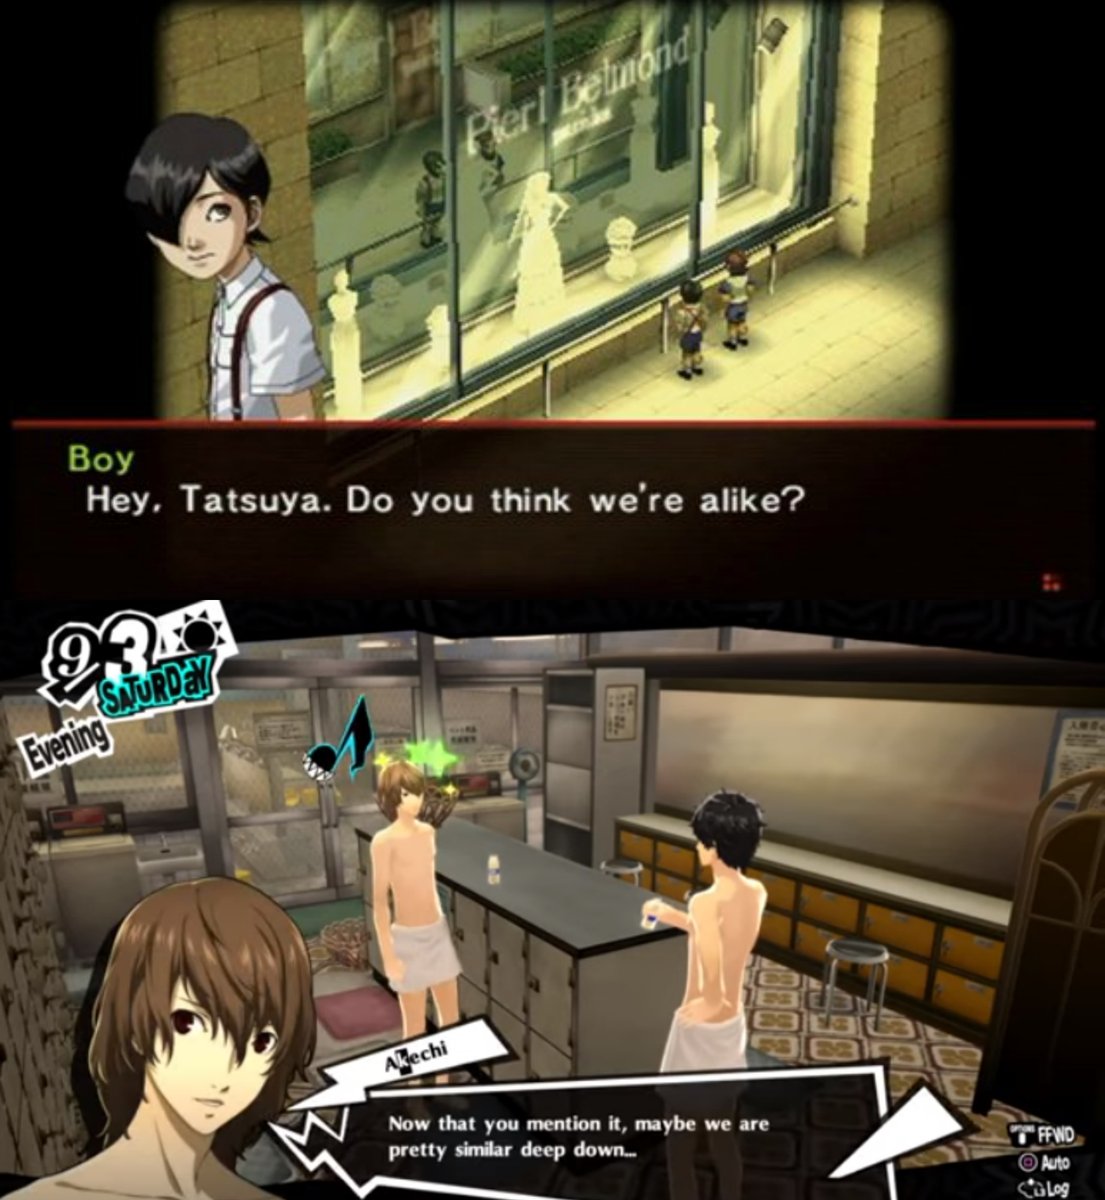 yeah guys this is such a coincidence am i right /s anyway i know its not REALLY concrete evidence but im adding this as a little "AHA!" kind of thing bc why not. shuake nation.(technical spoilers for november persona 5)